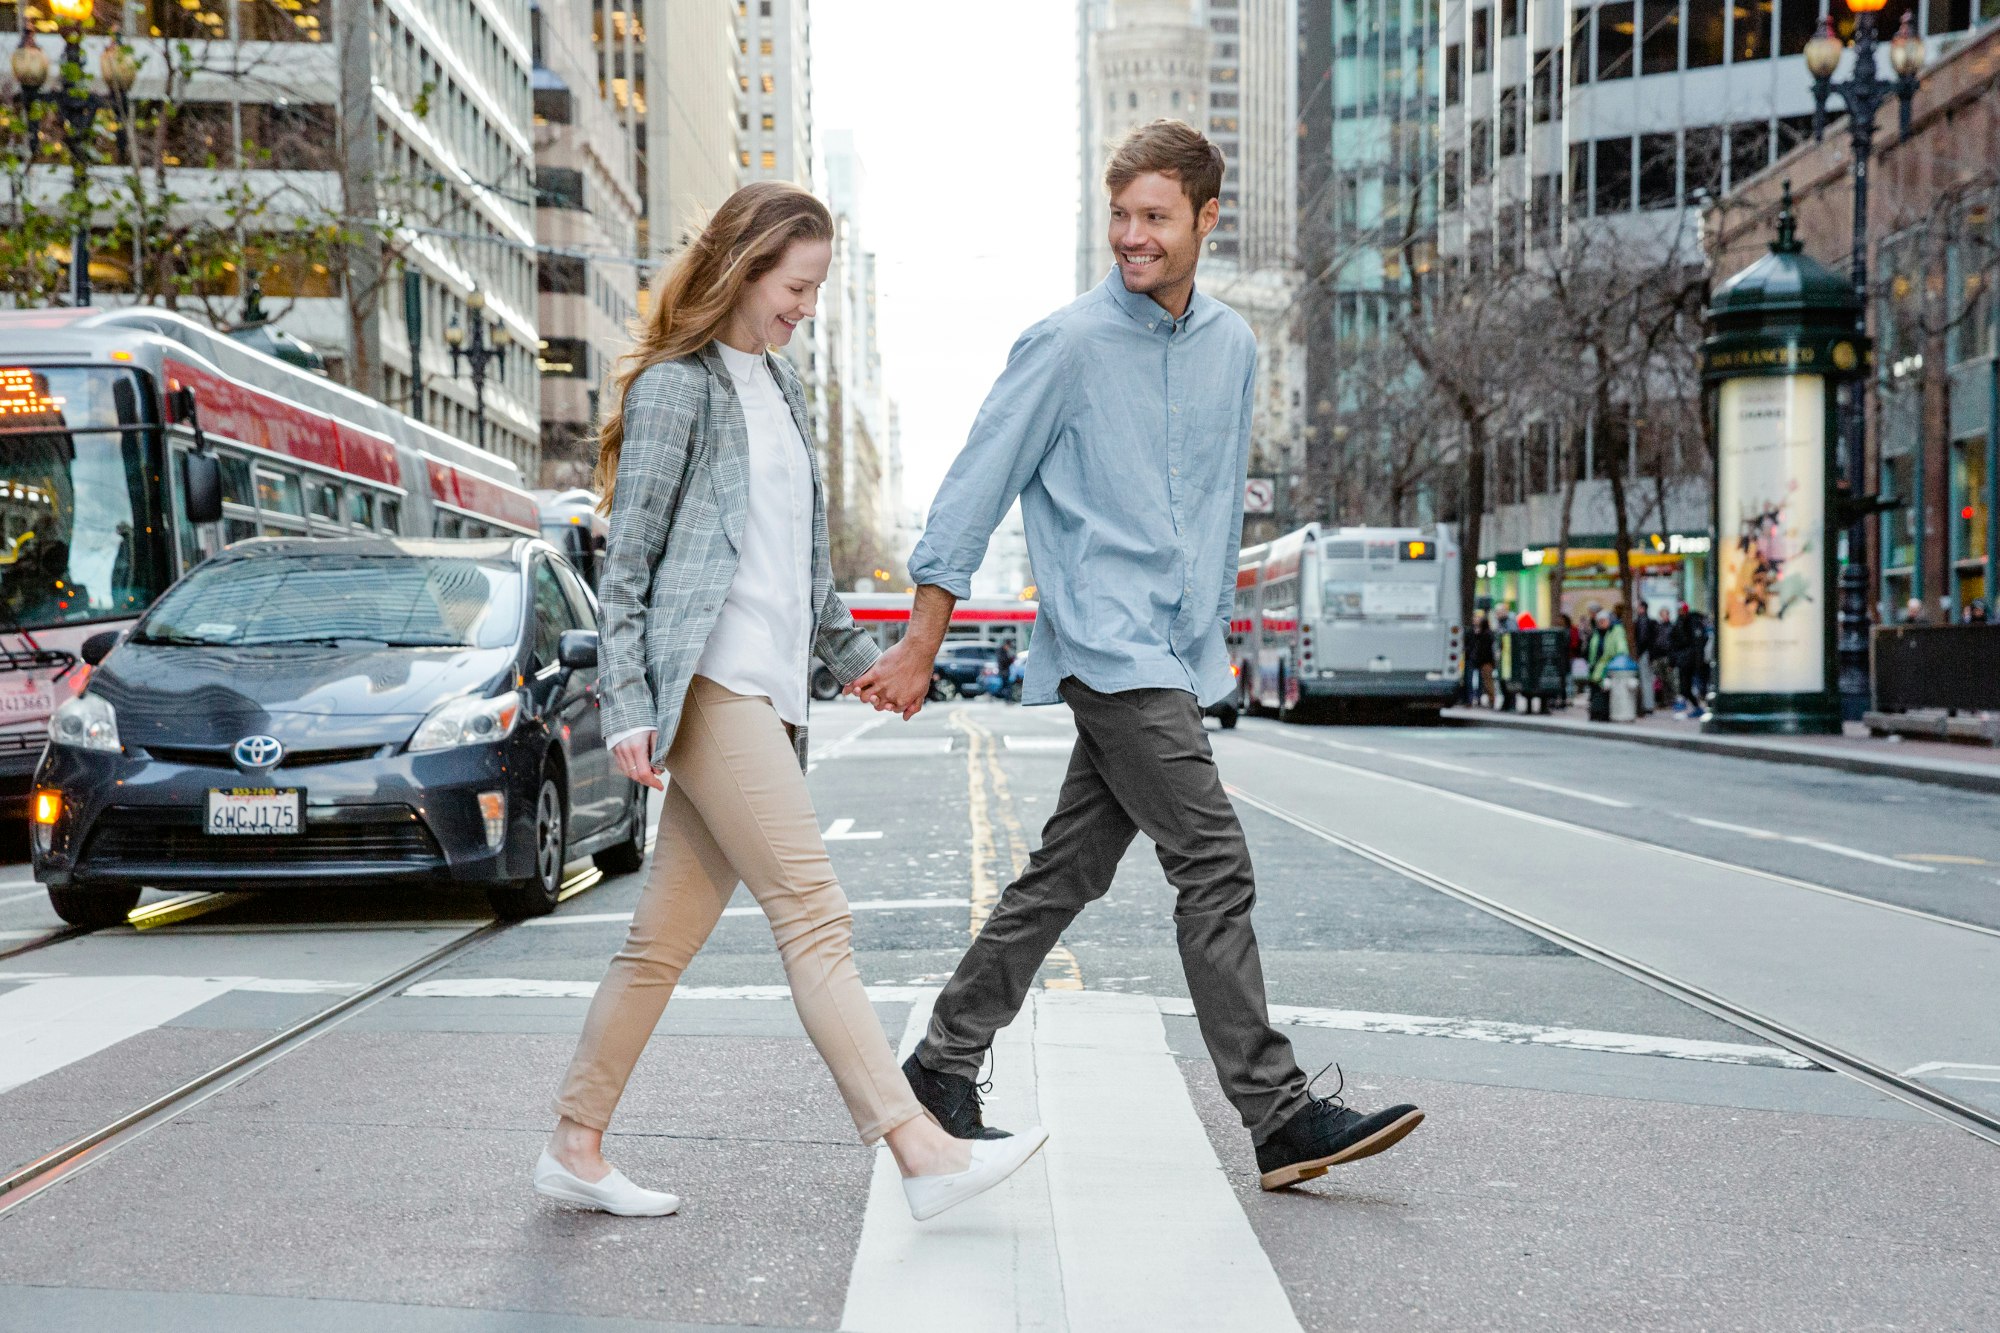 A man and woman walking through a city wearing the travel pants